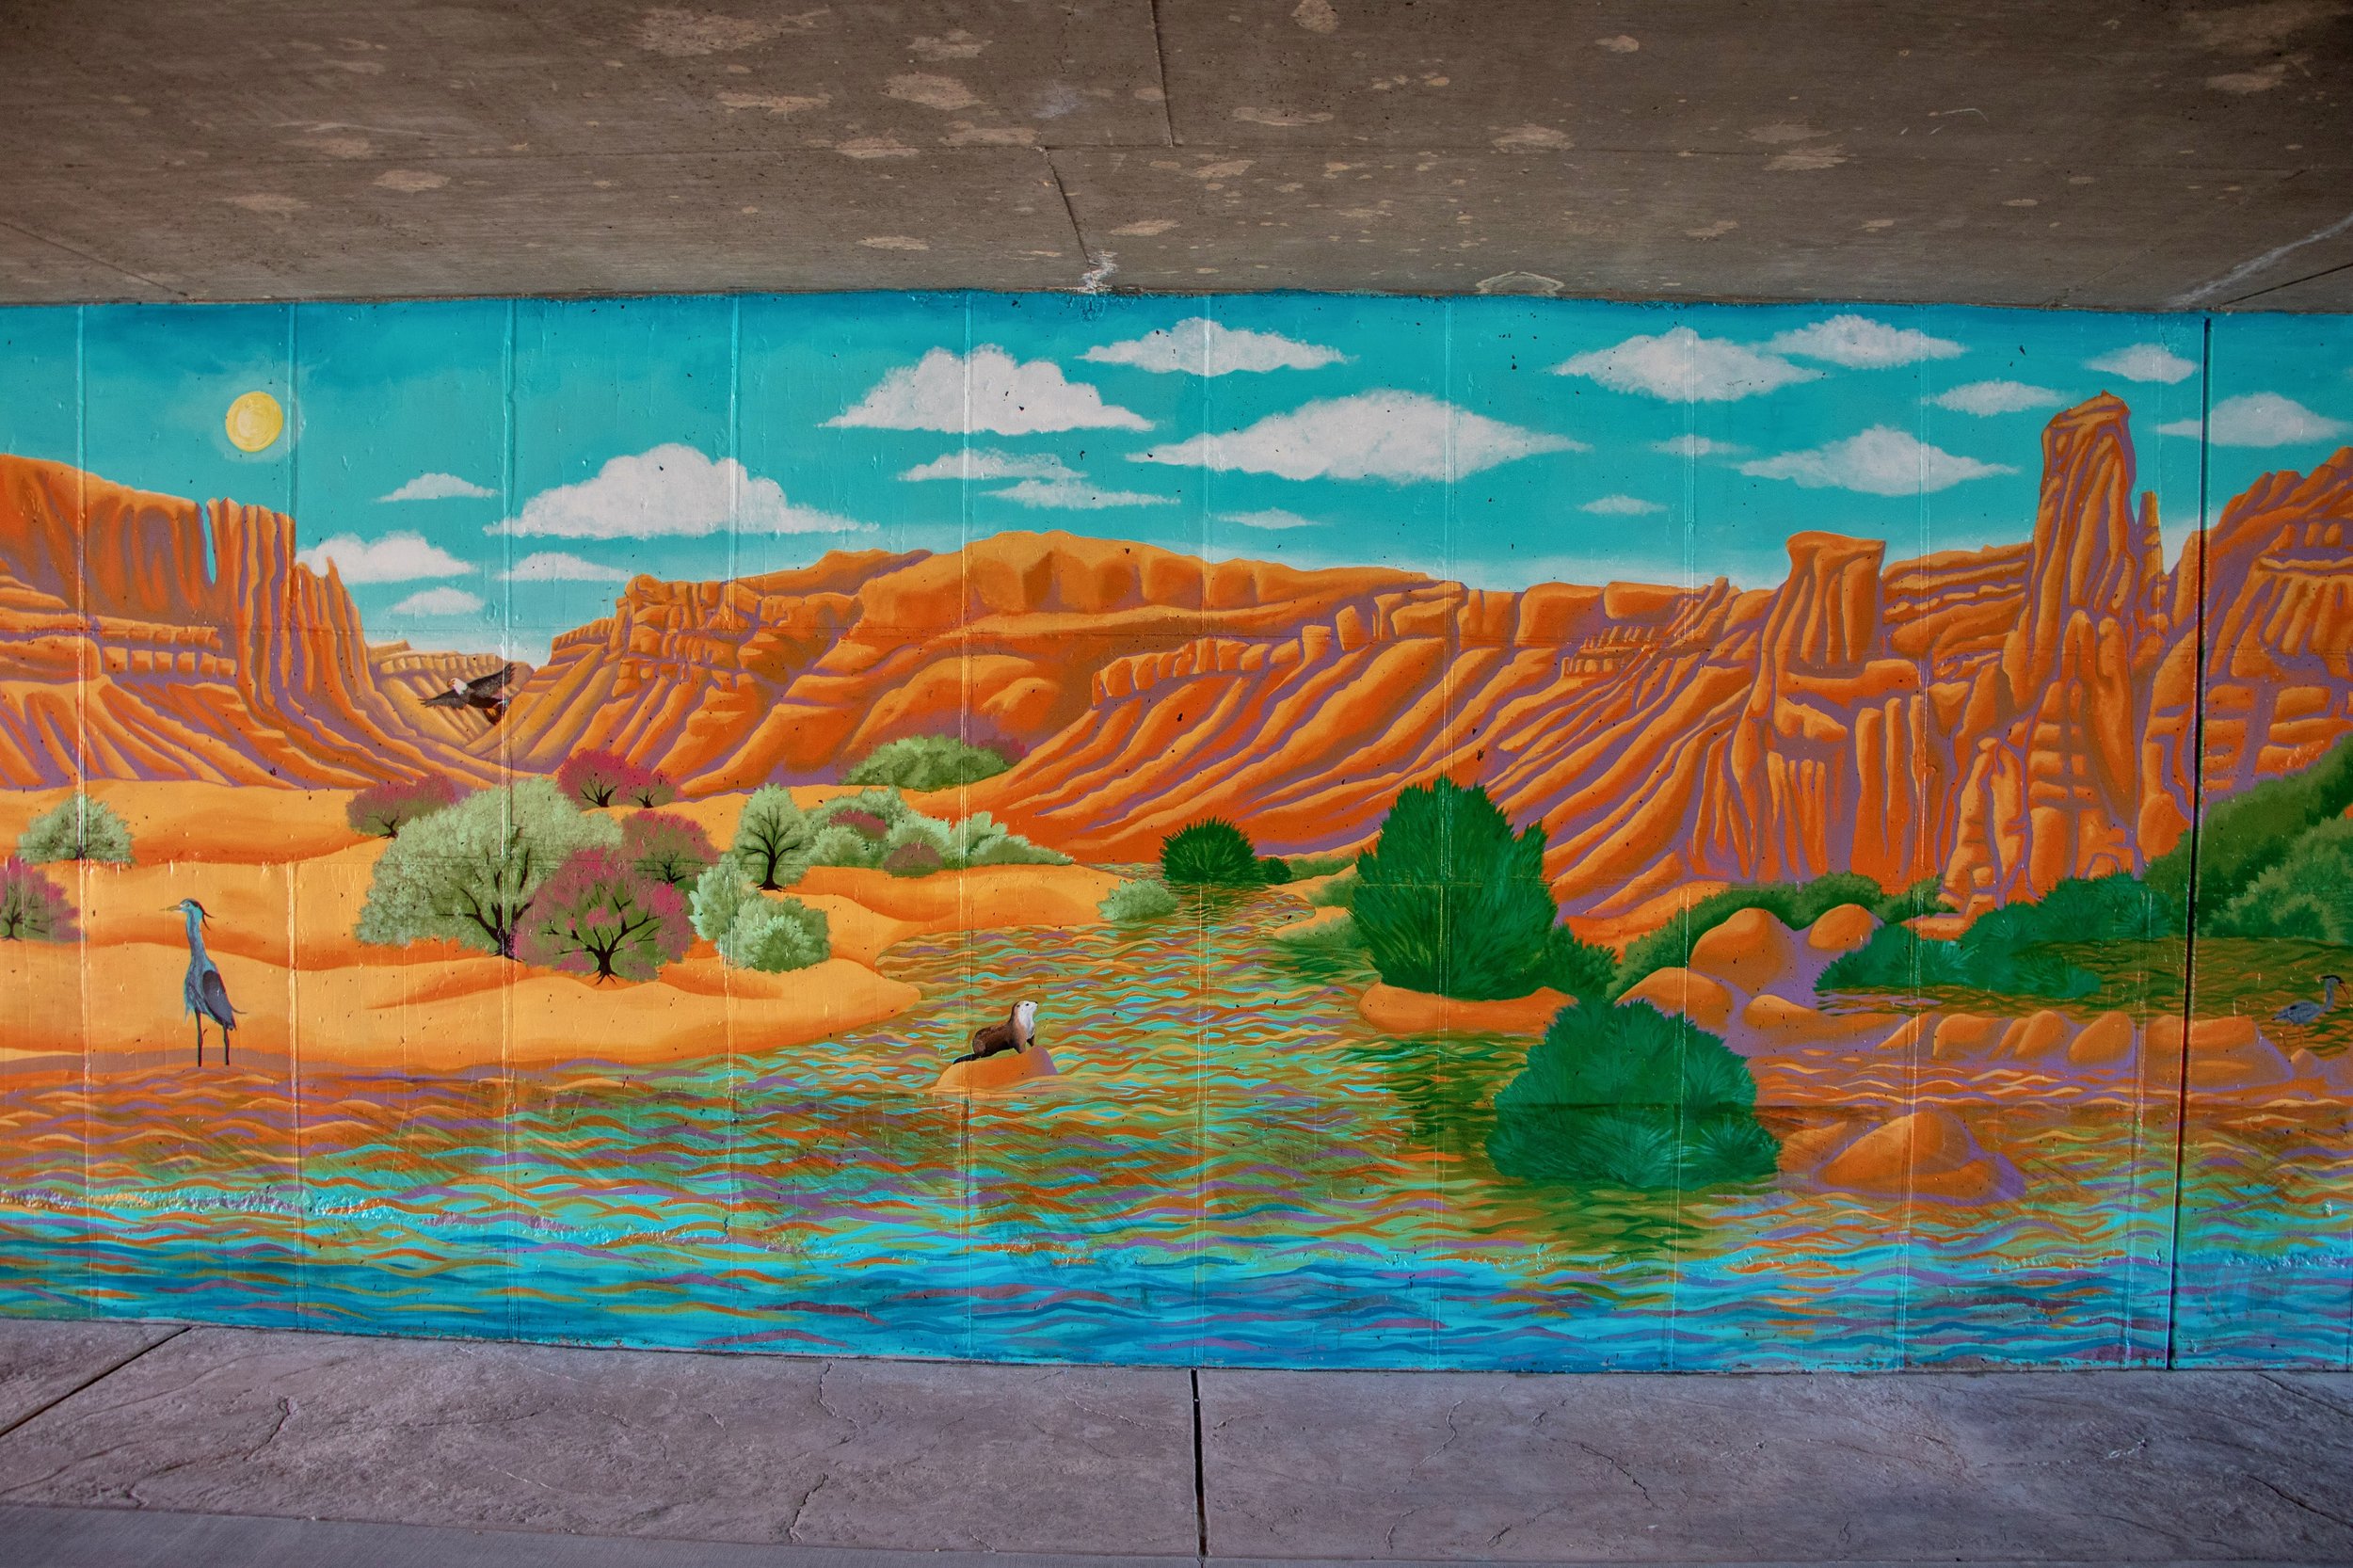  The mural then moves into the heat of the day, showing the passage of time. The piece is performative - as the viewer moves through the tunnel they act out our human effect on the environment, and the river and surrounding landscape begin to degrade